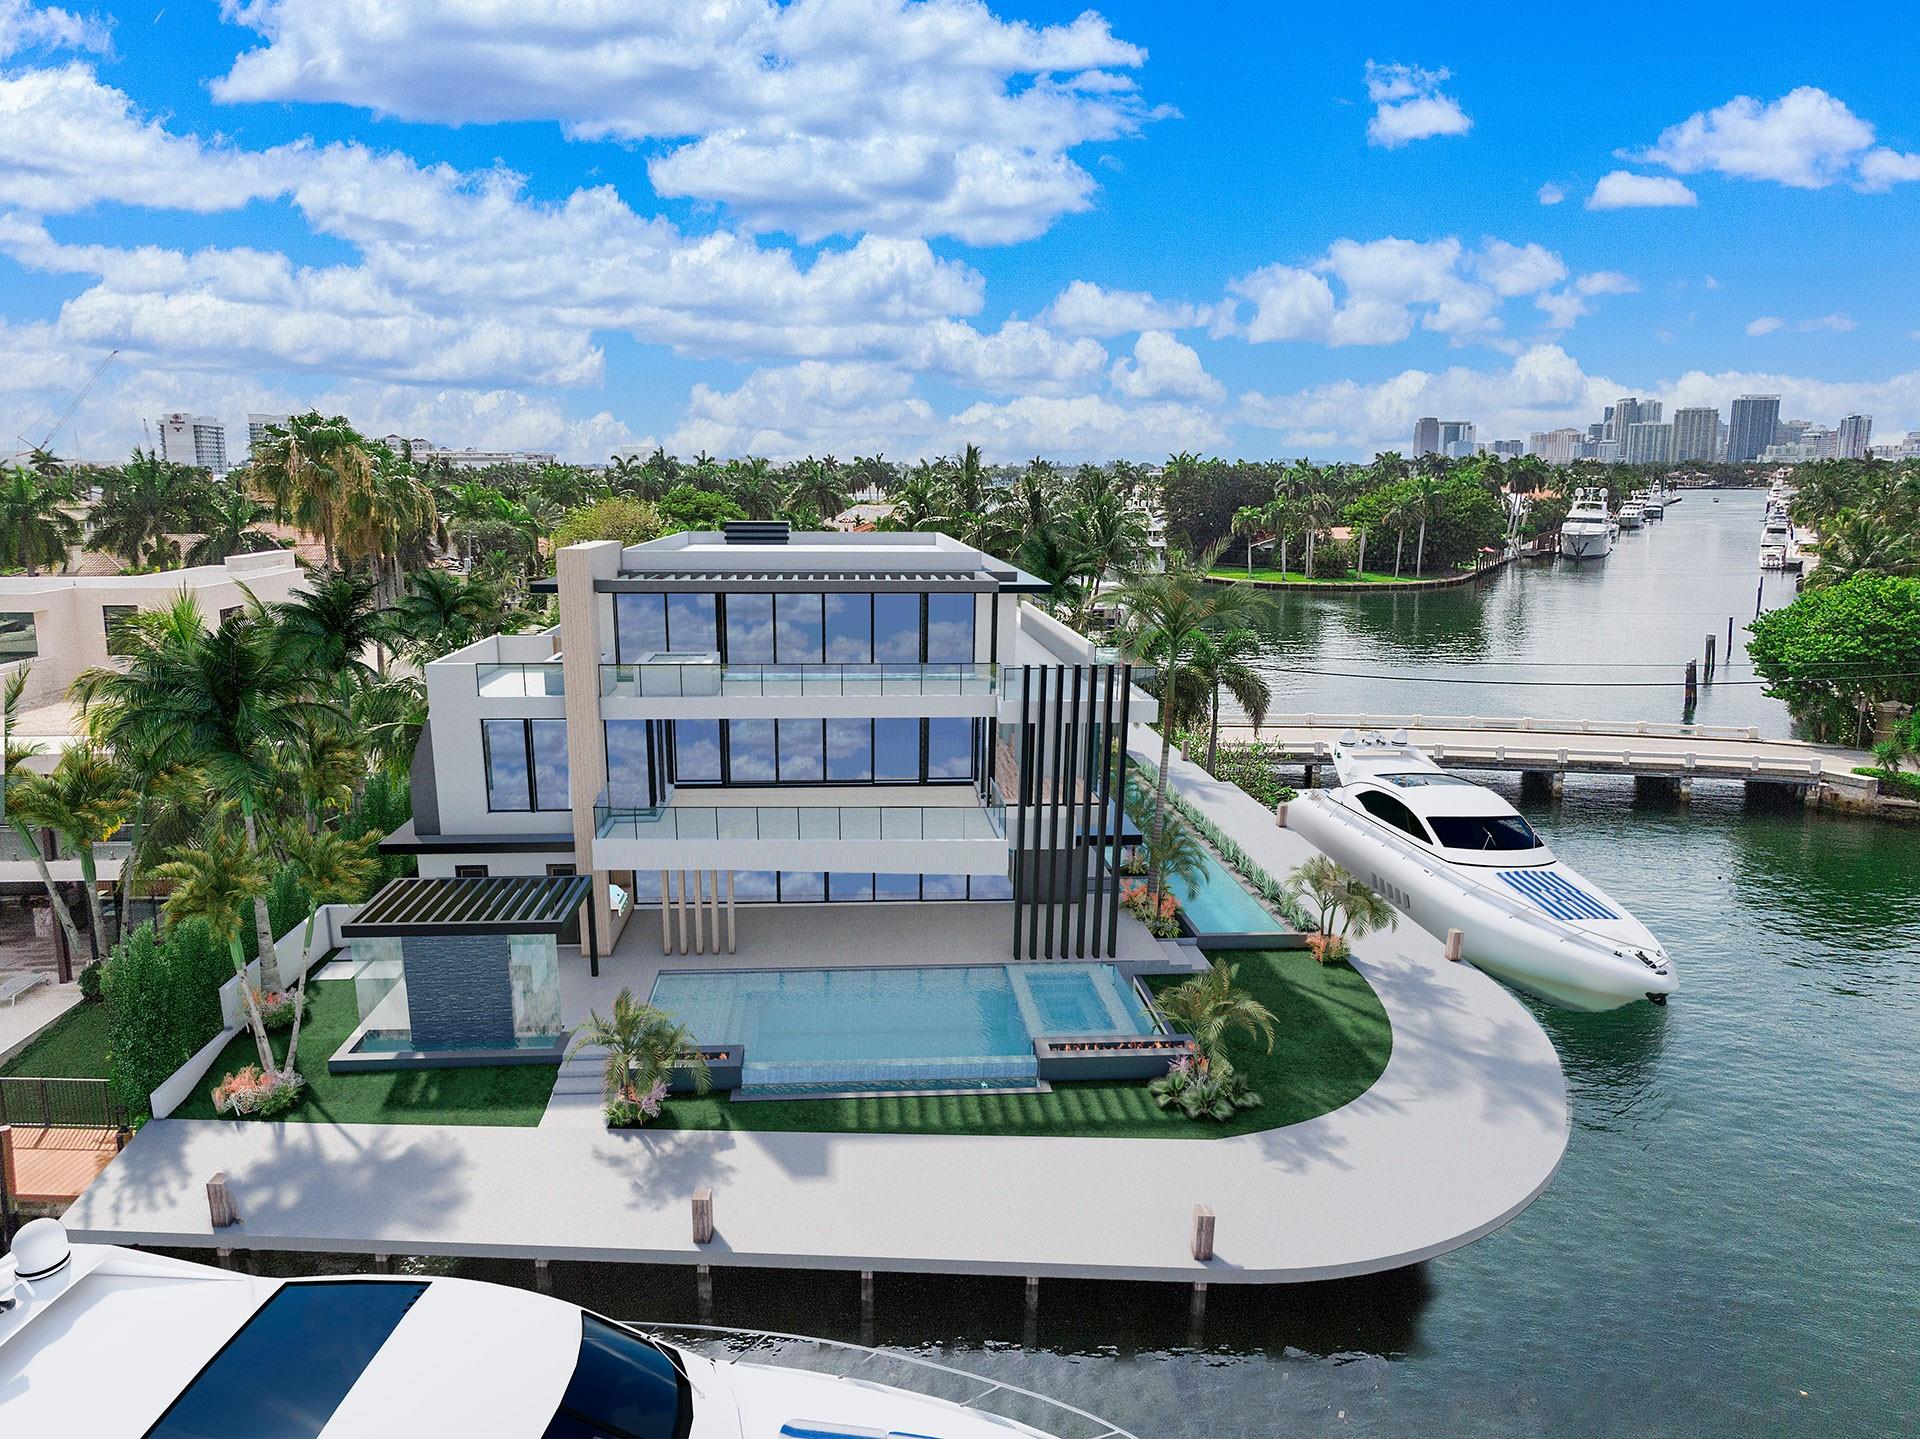 Welcome to Ft Lauderdale's Most Premier Luxury Modern Compound!  Positioned on an Amazing One of a Kind Point Lot within The Most Prestigious Gated and Secured Community of Harbor Beach!  This Rare Trophy East Point offers 250+/- of deep water dockage for large or multiple yachts and Delivers Sensational Lake Sylvan and Picturesque Downtown City Views! Let your Imagination Run Wild over 3 Floors of the Finest Italian Finishes, Home Wellness Center/Gym, Office, 7 Bedrooms, Roof Top Lounge, equipped w/Bar, Media Room, Game Room, and Expansive Wrap Around Roof Top Deck. Outside Escape to your Wellness Resort in Complete Privacy, Multiple Pools, Hot/Cold Plunge, Sauna/Steam Showers, Exquisite Summer Kitchen w/Bar and Dining, Waterfalls, Fire Features! Coming Nov 2024! Seize the Future Today!